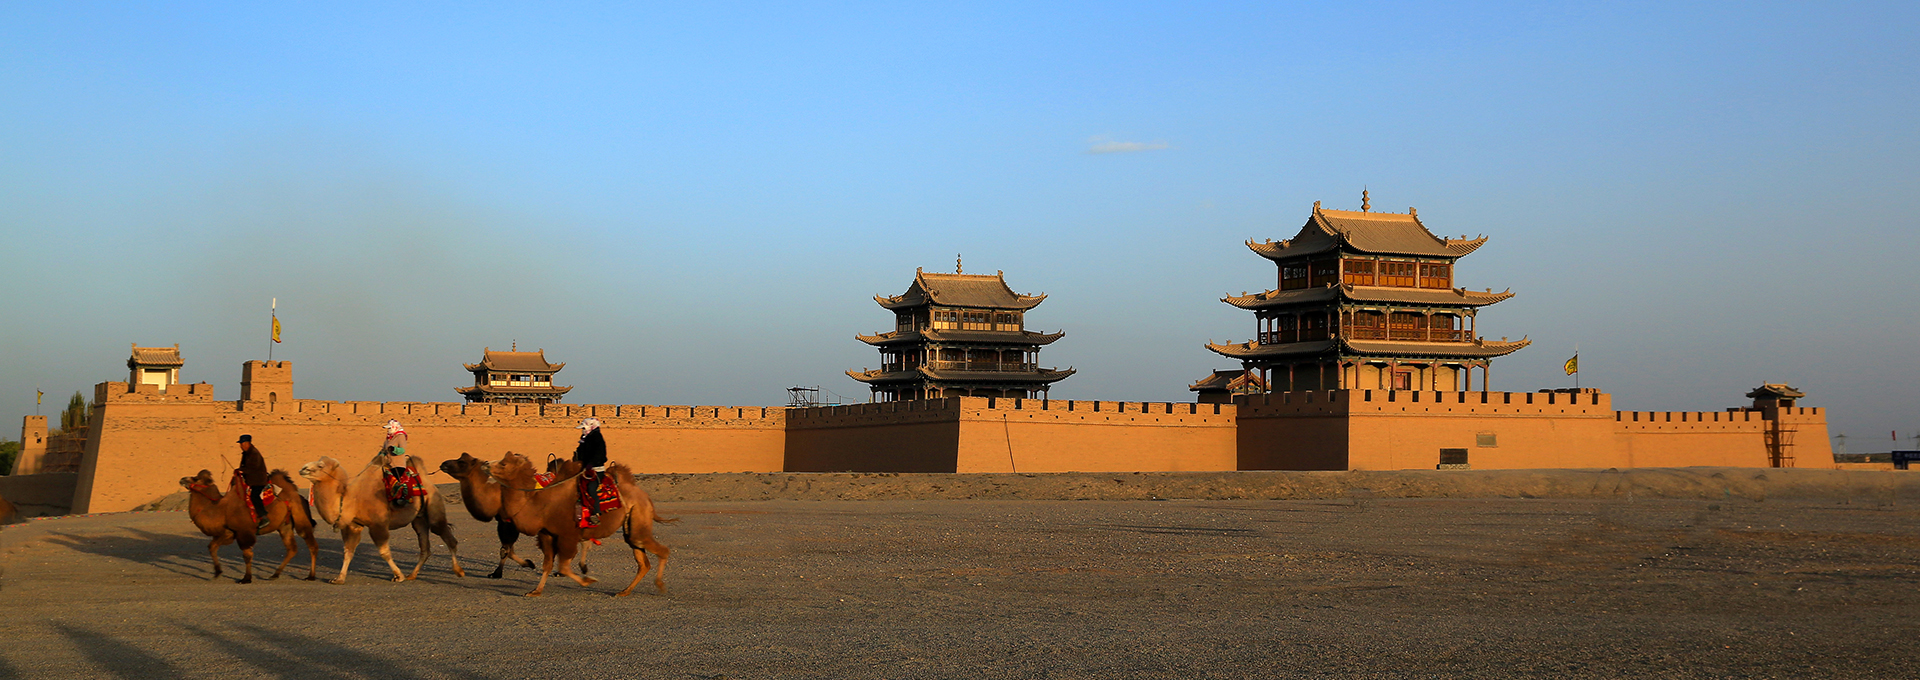 Silk Road Group Tours